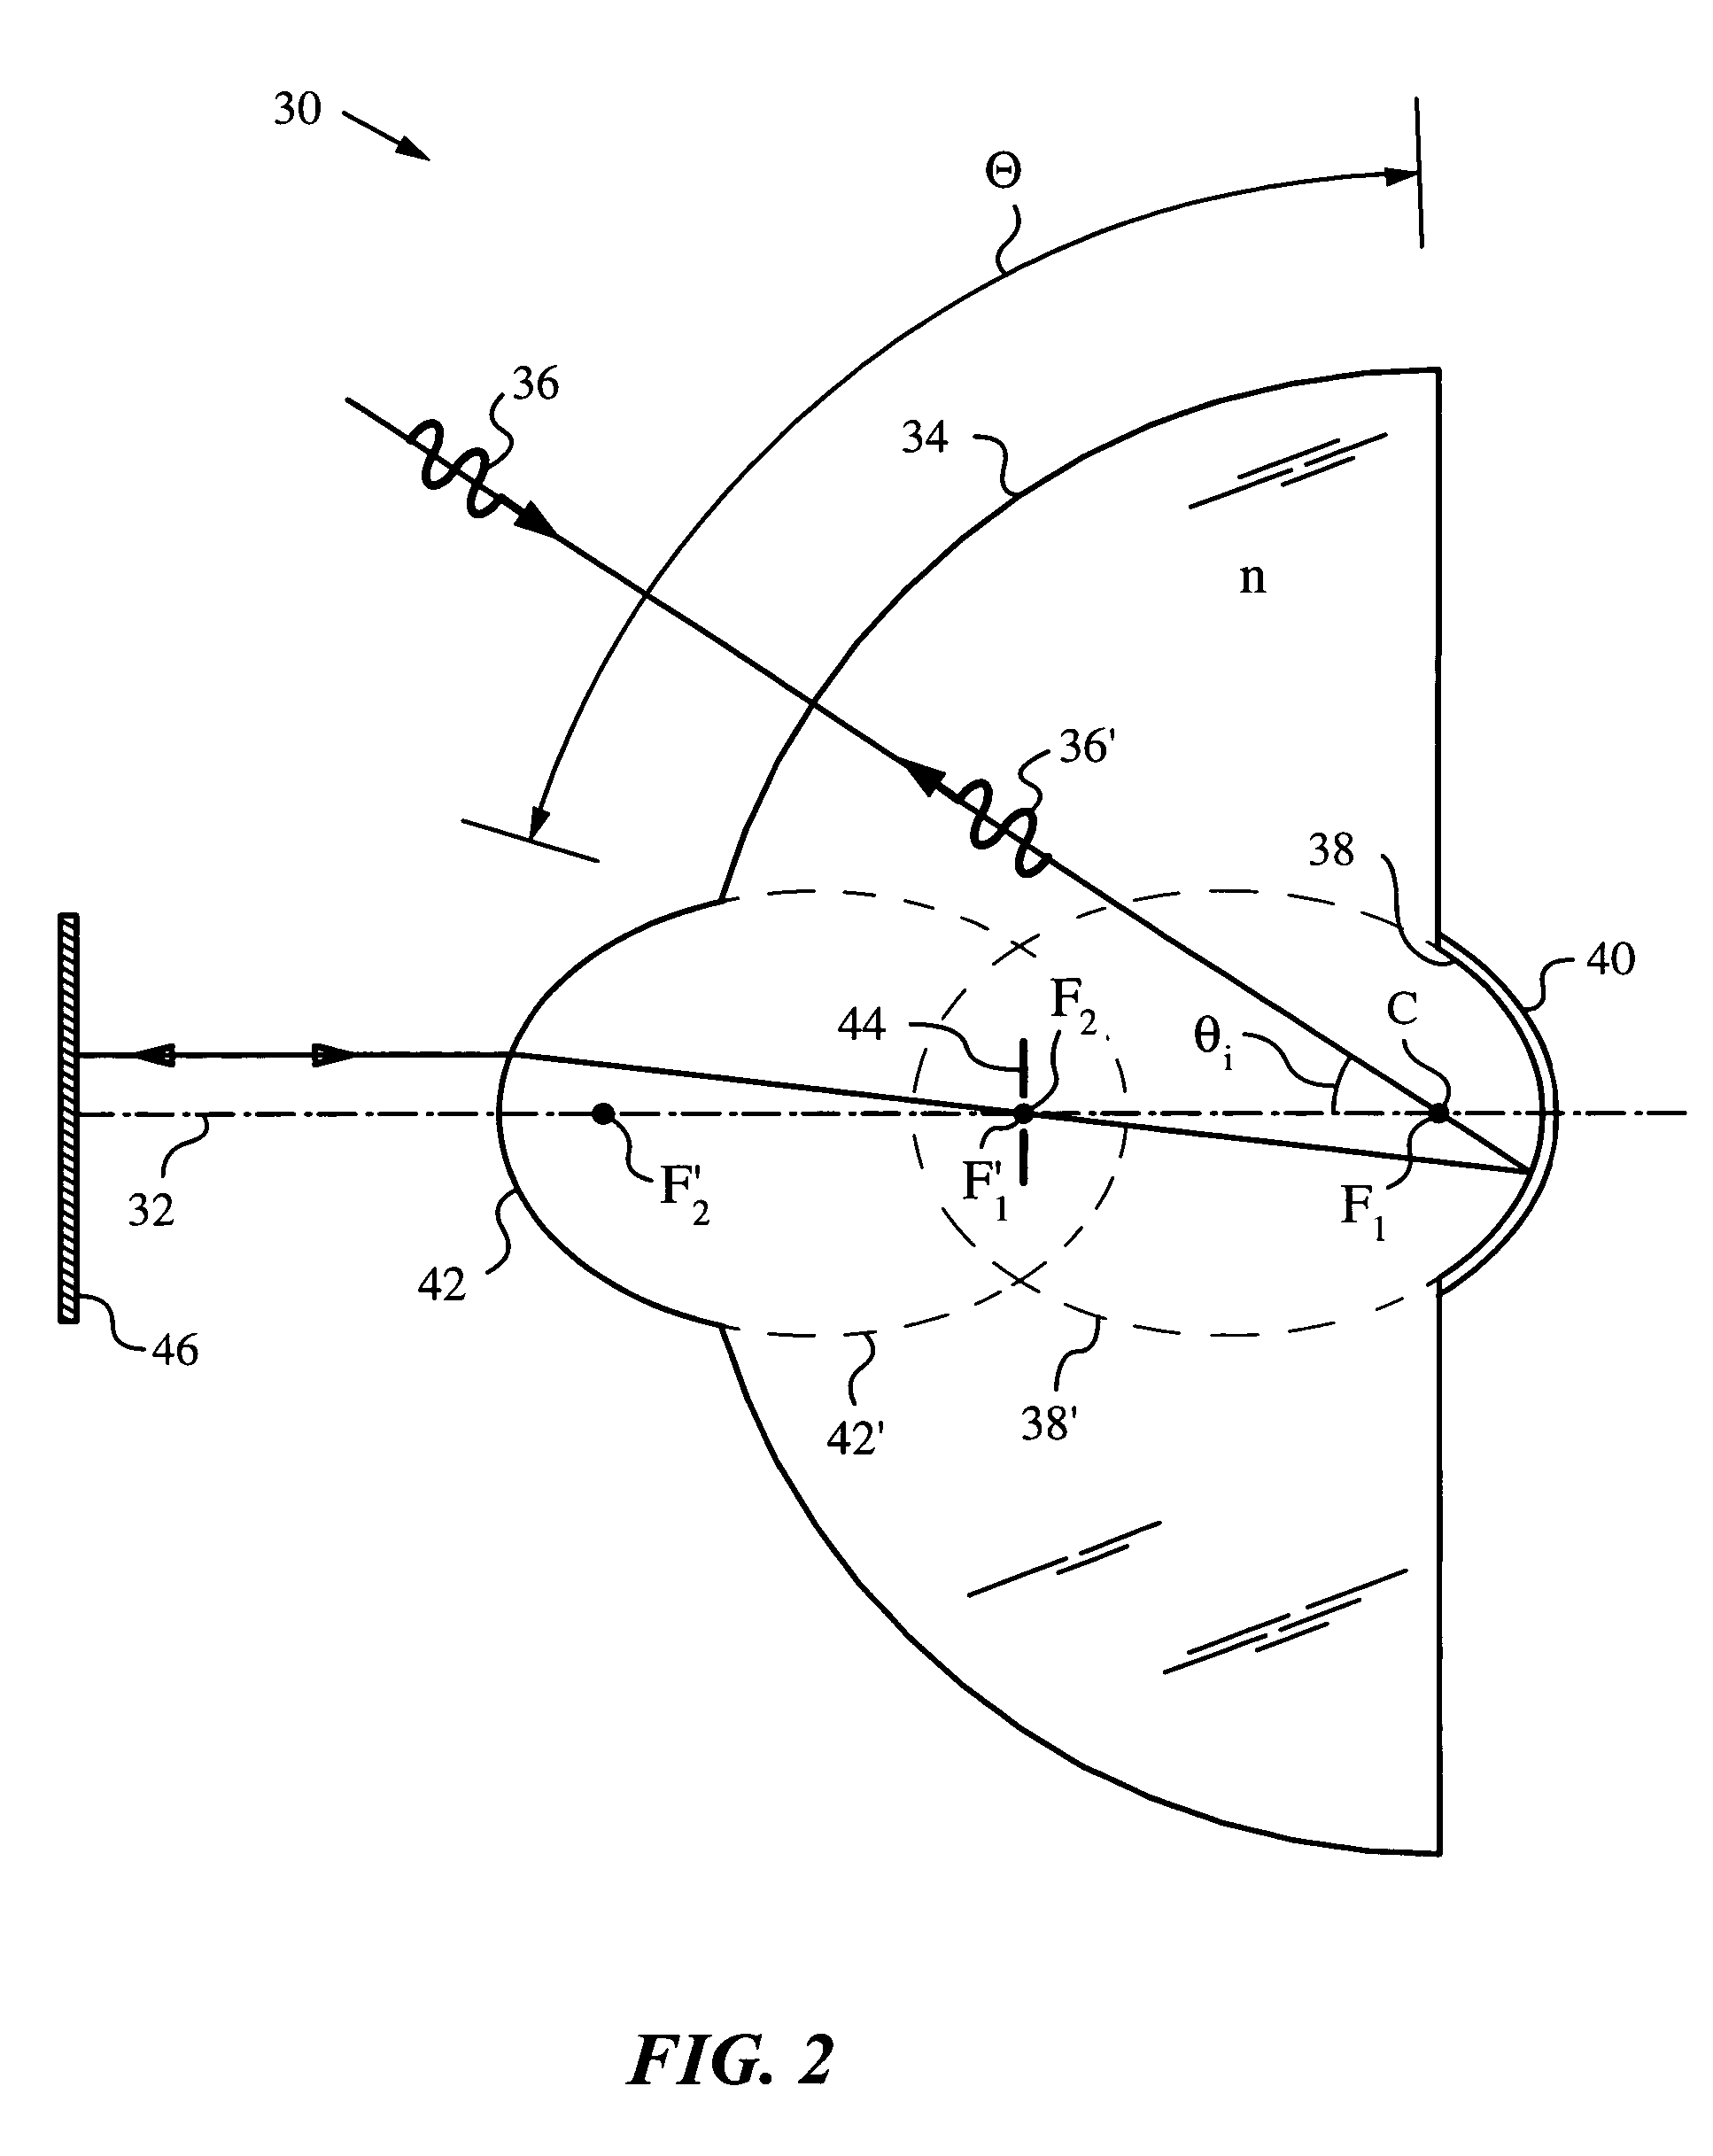 Solid catadioptric lens with a single viewpoint